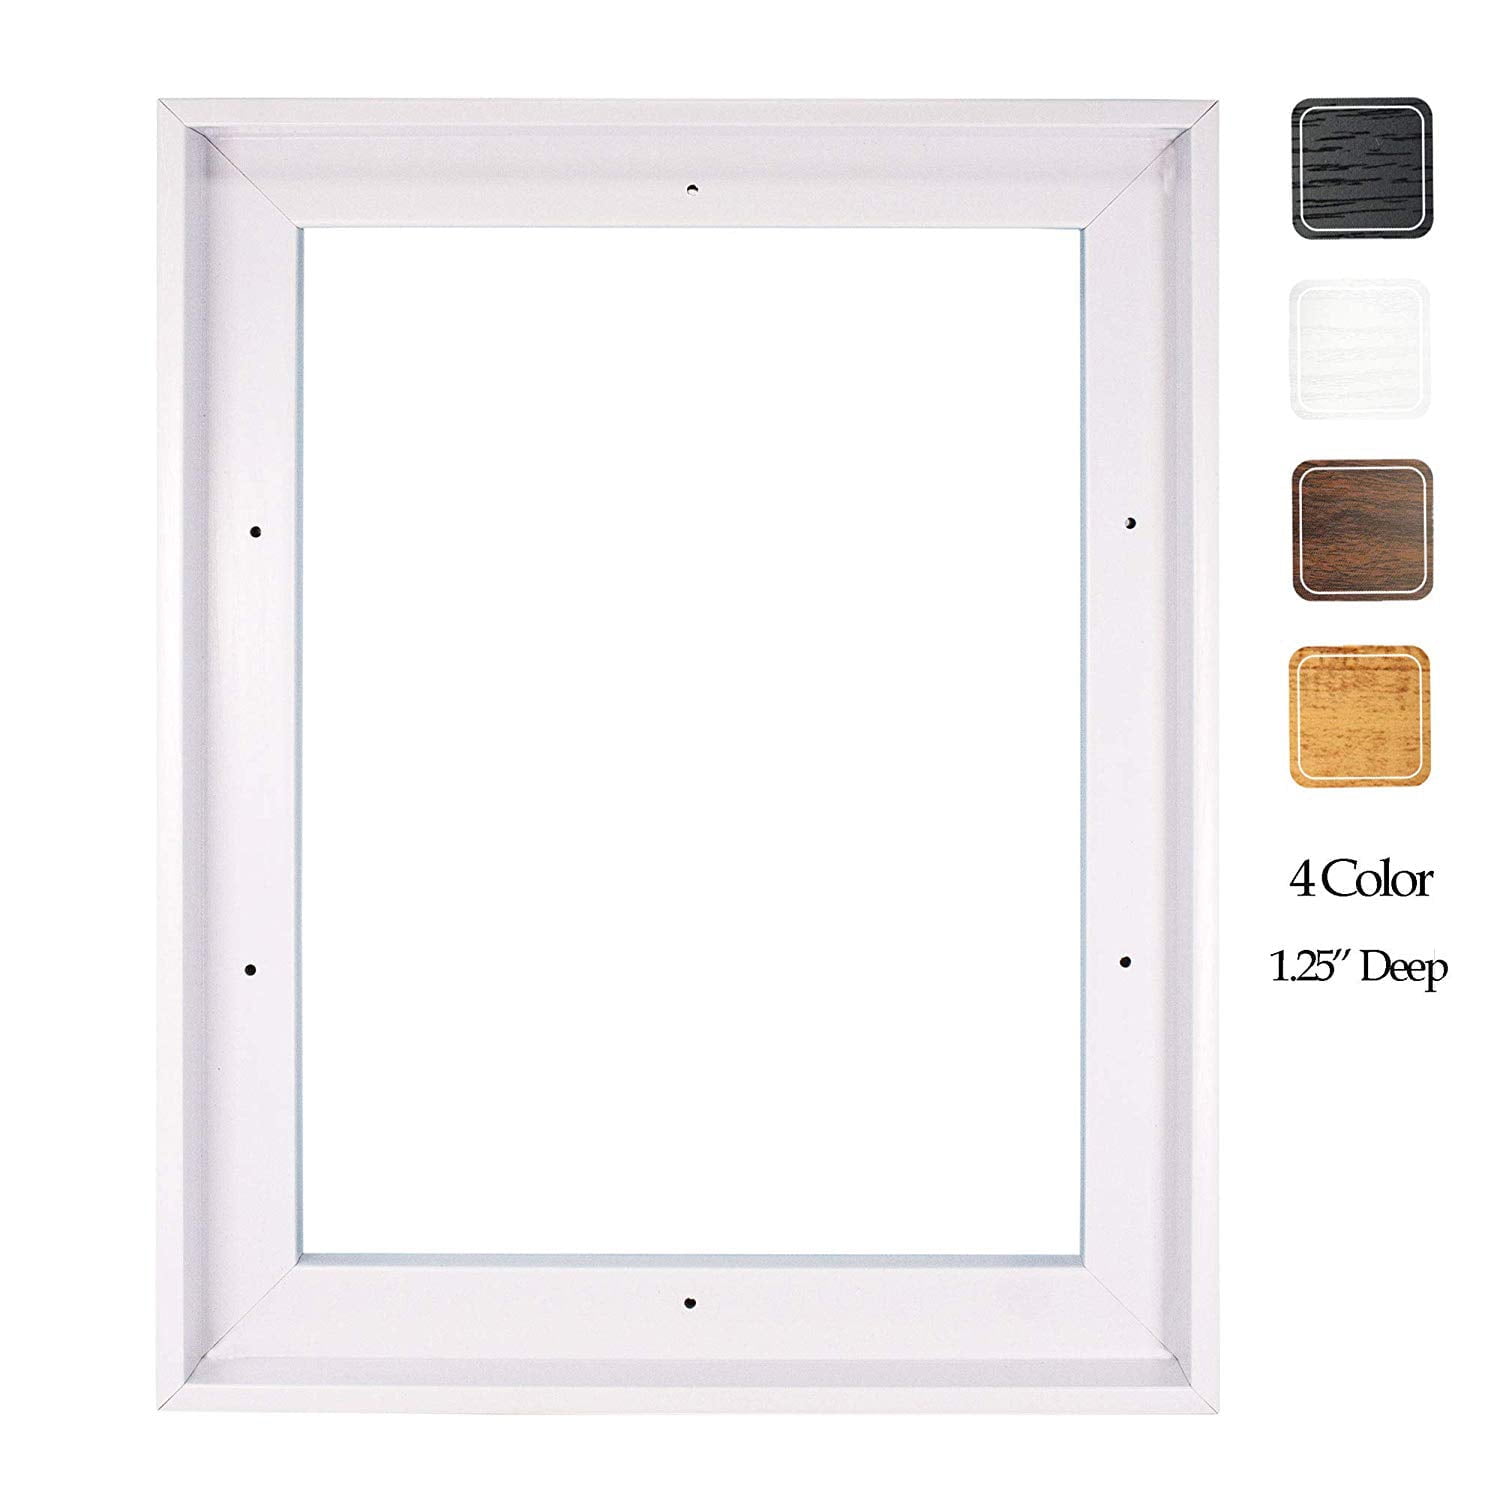 11x14 Canvas Floating Frame for 11x14 Stretched Canvas 11 x 14 Art Painting